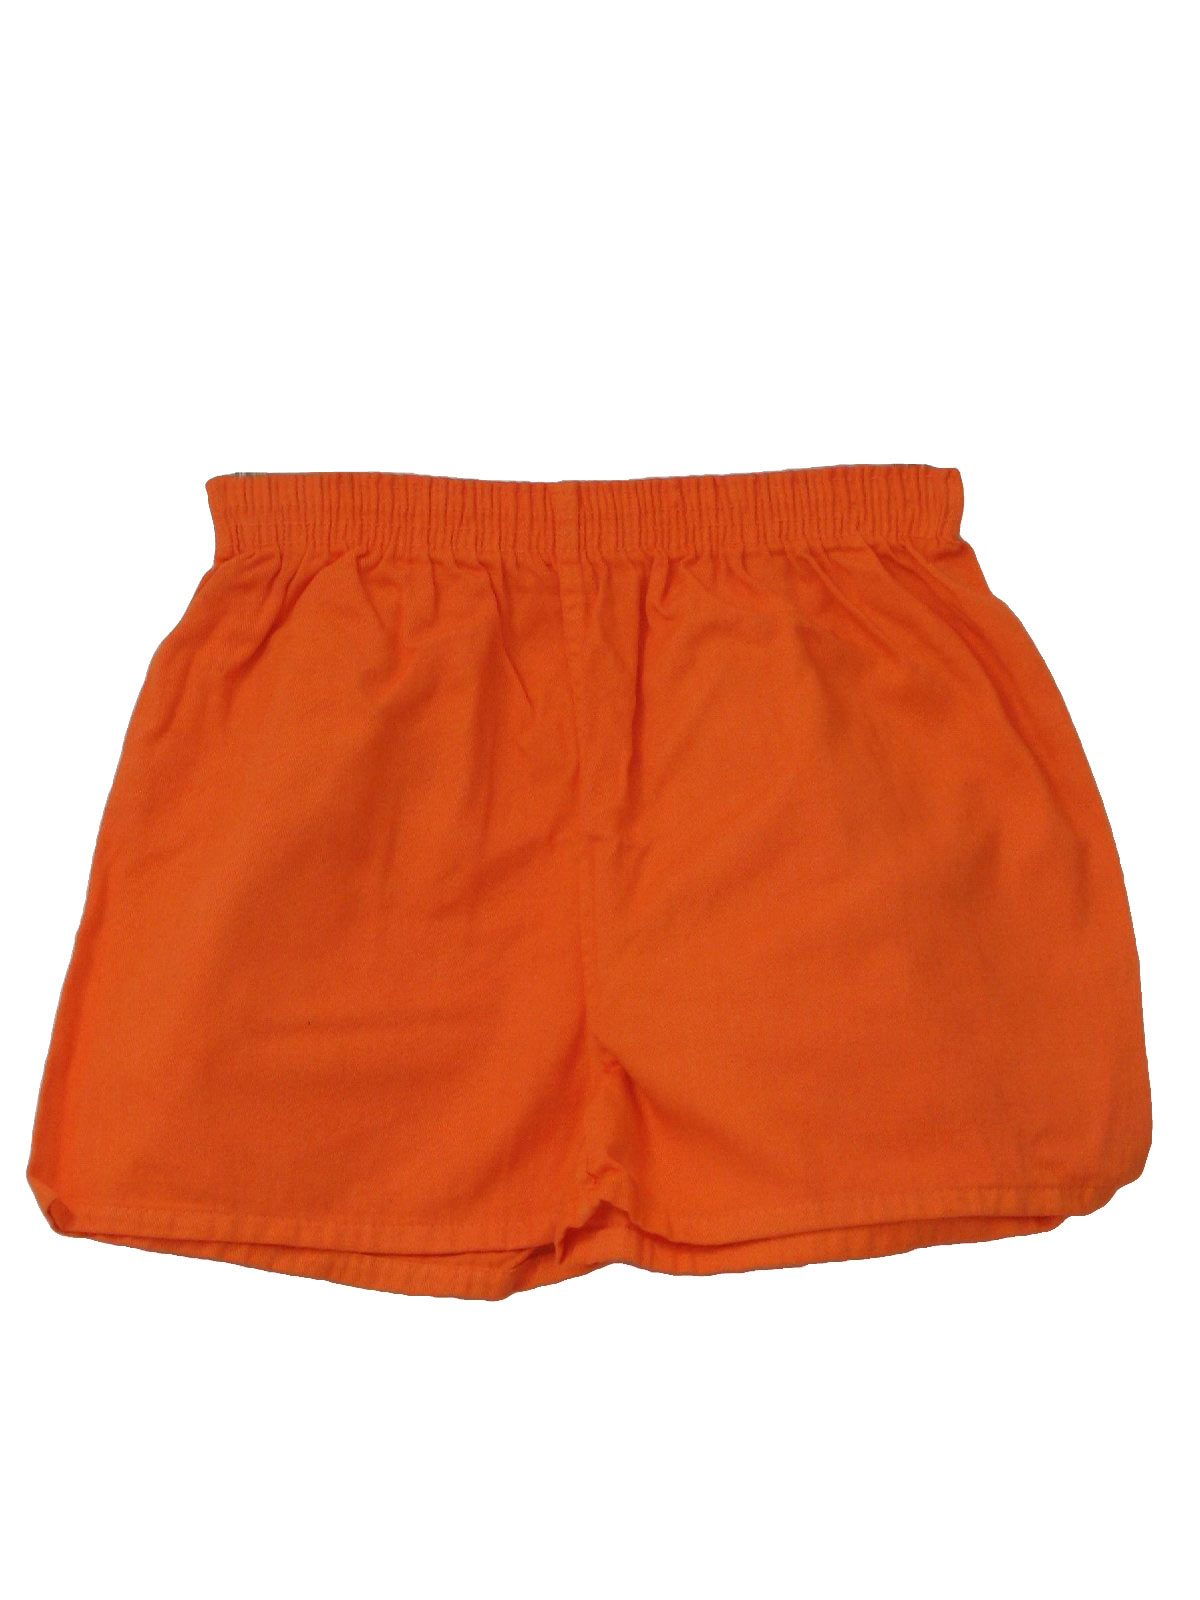 Eighties Vintage Shorts: 80s -Athletic Shorts- Mens bright caution ...